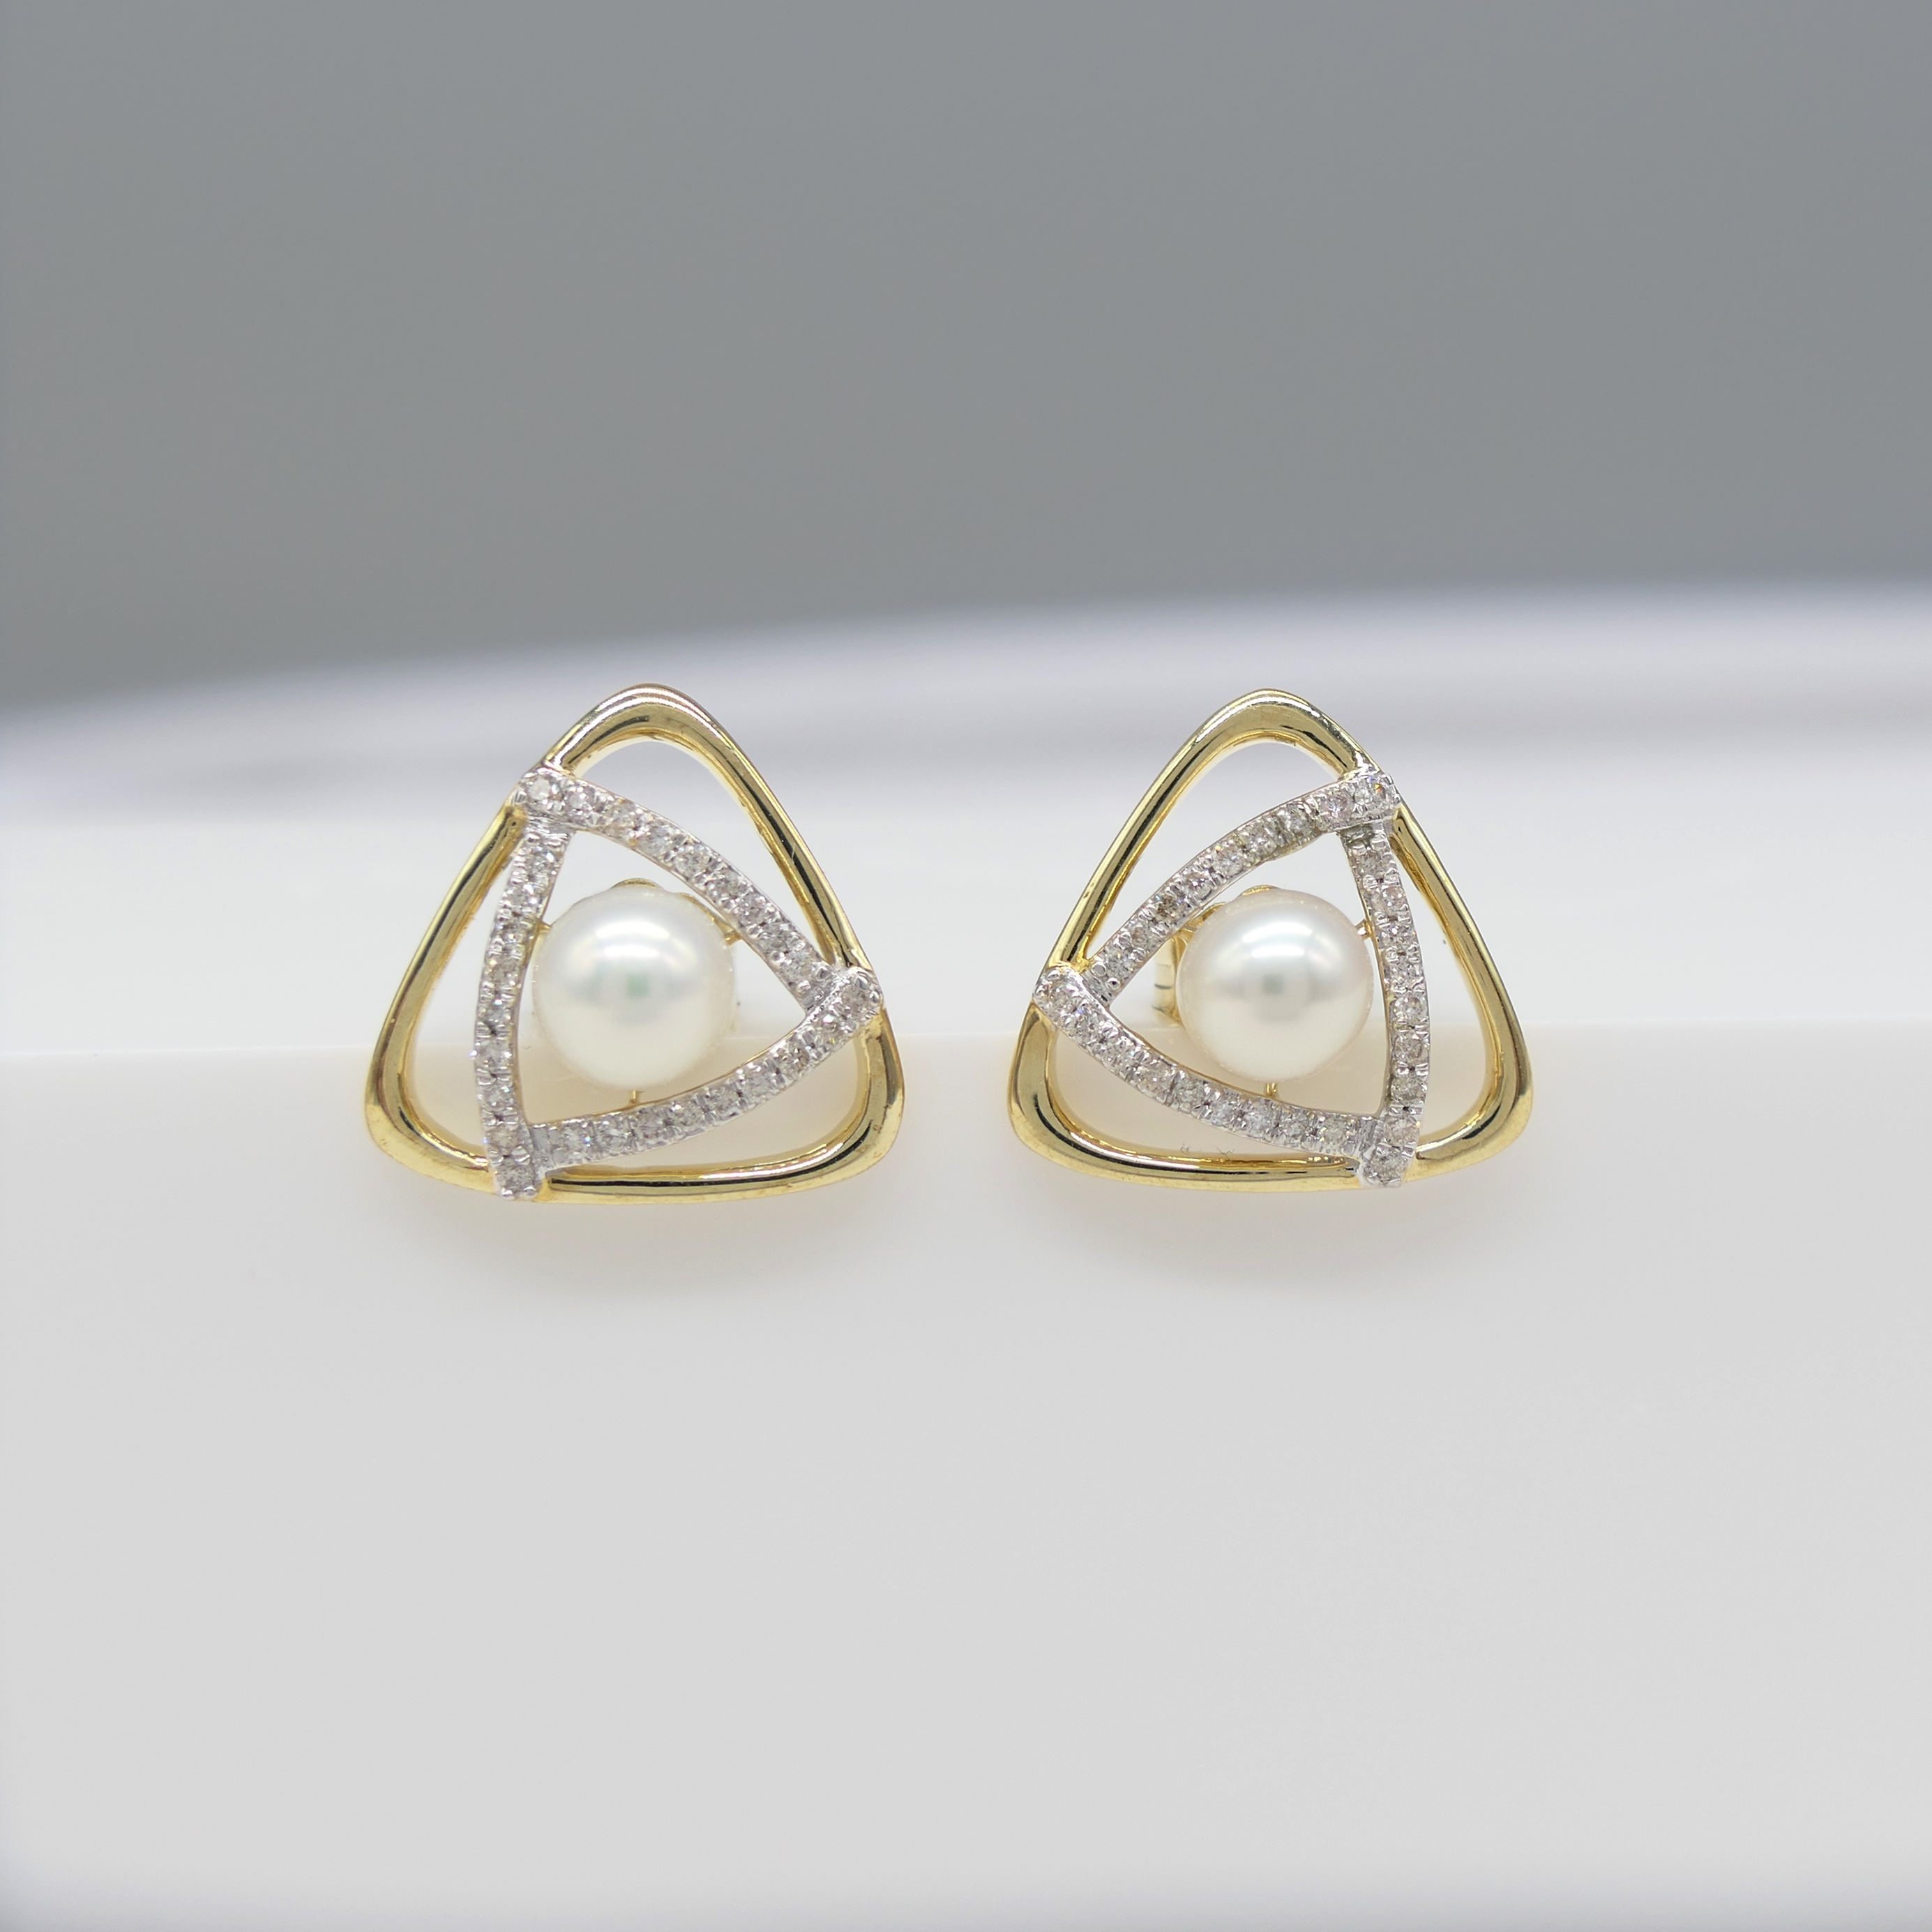 Pair of 9ct Yellow Gold Triangular Ear Studs Set With Cultured Pearls and Diamonds, Boxed